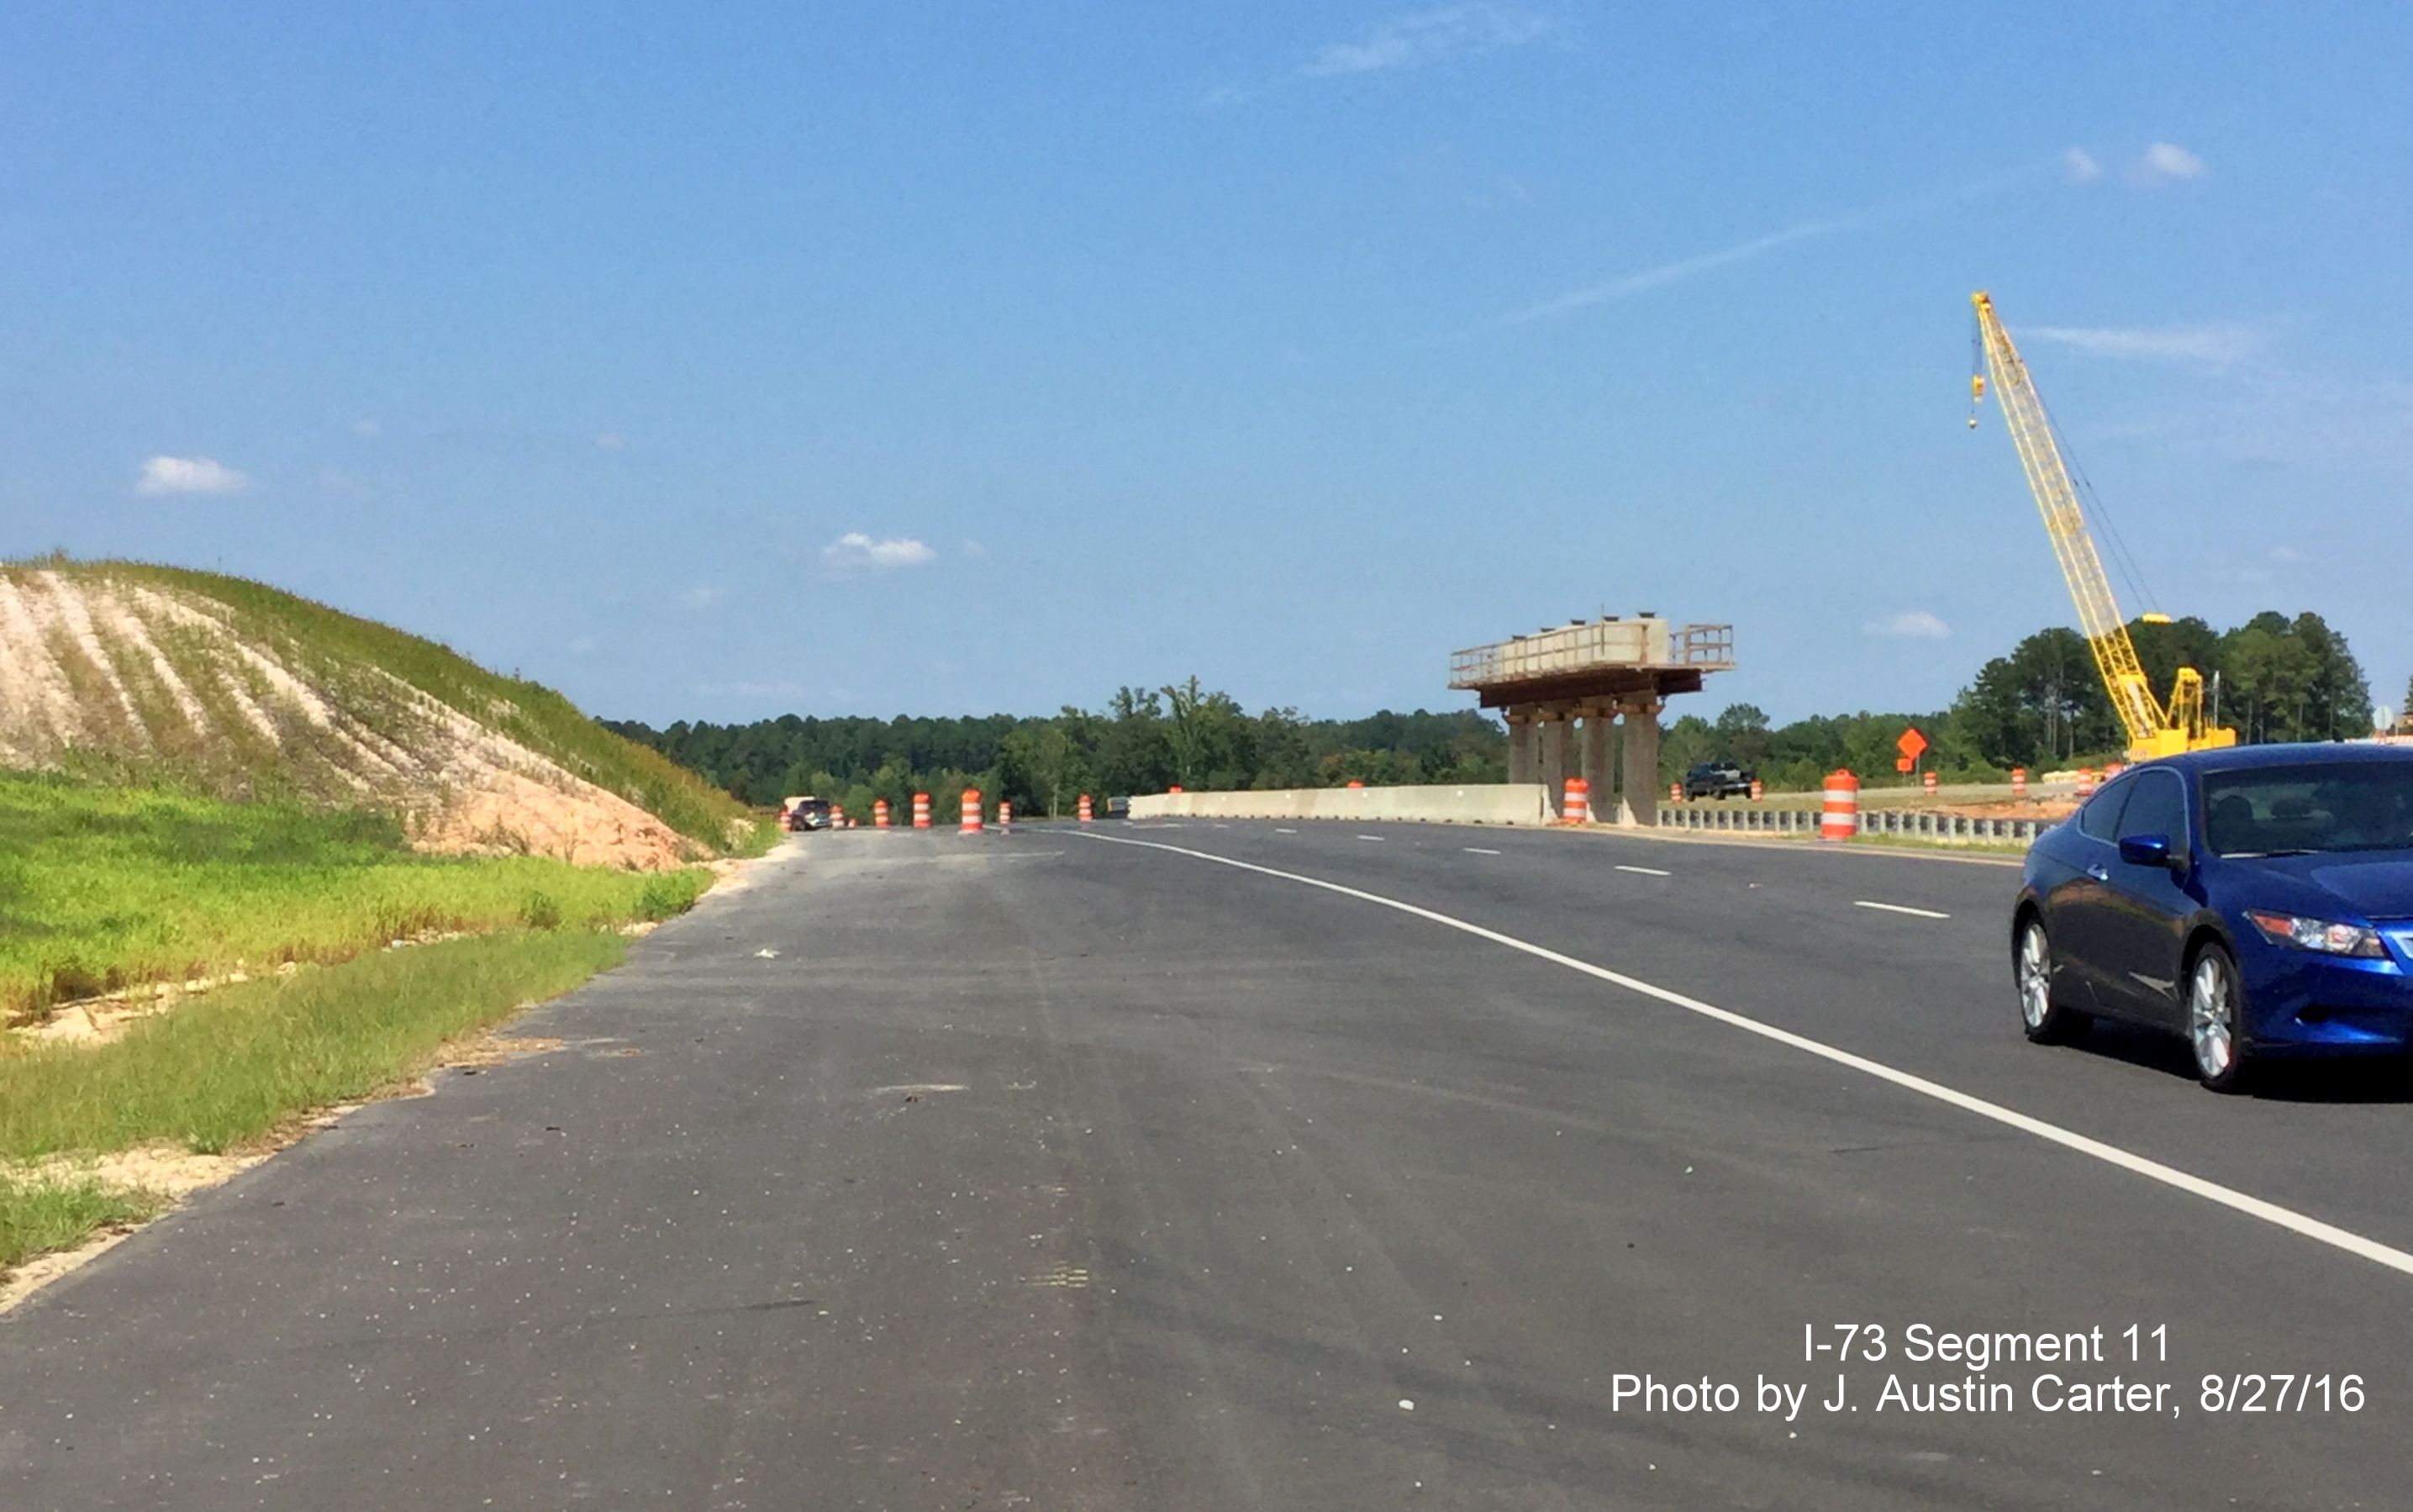 Image of center pier under construction in US 220 median for future Haywood Cemetery Road Bridge over I-73/I-74 north of Rockingham,
        photo by J. Austin Carter